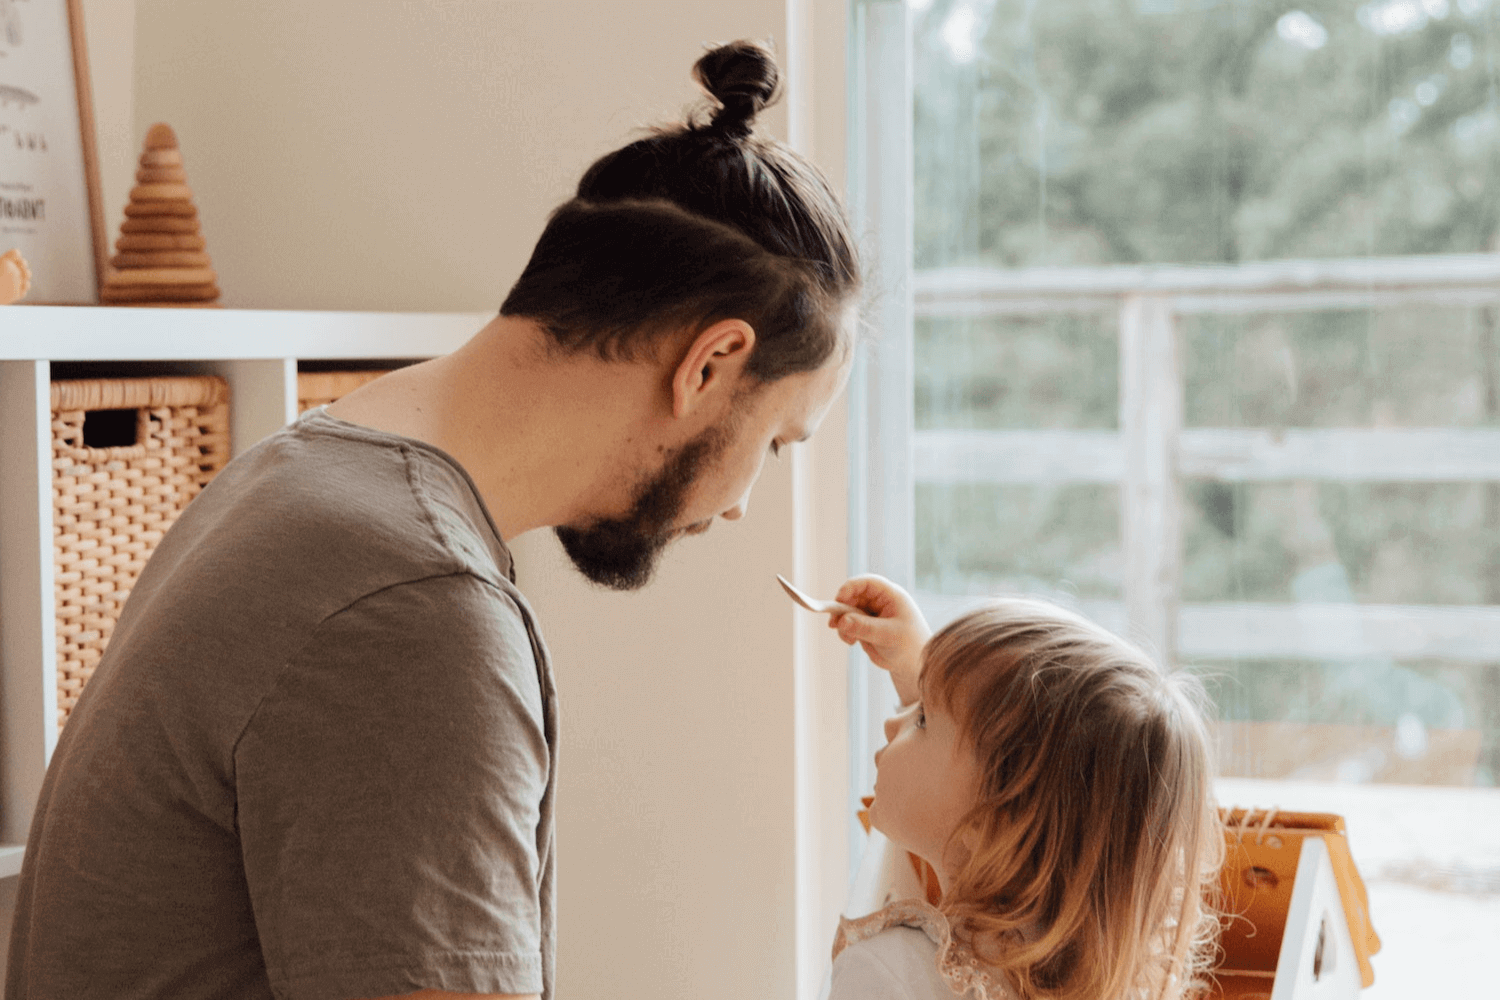 child custody rights for fathers | Melbourne Family Lawyers